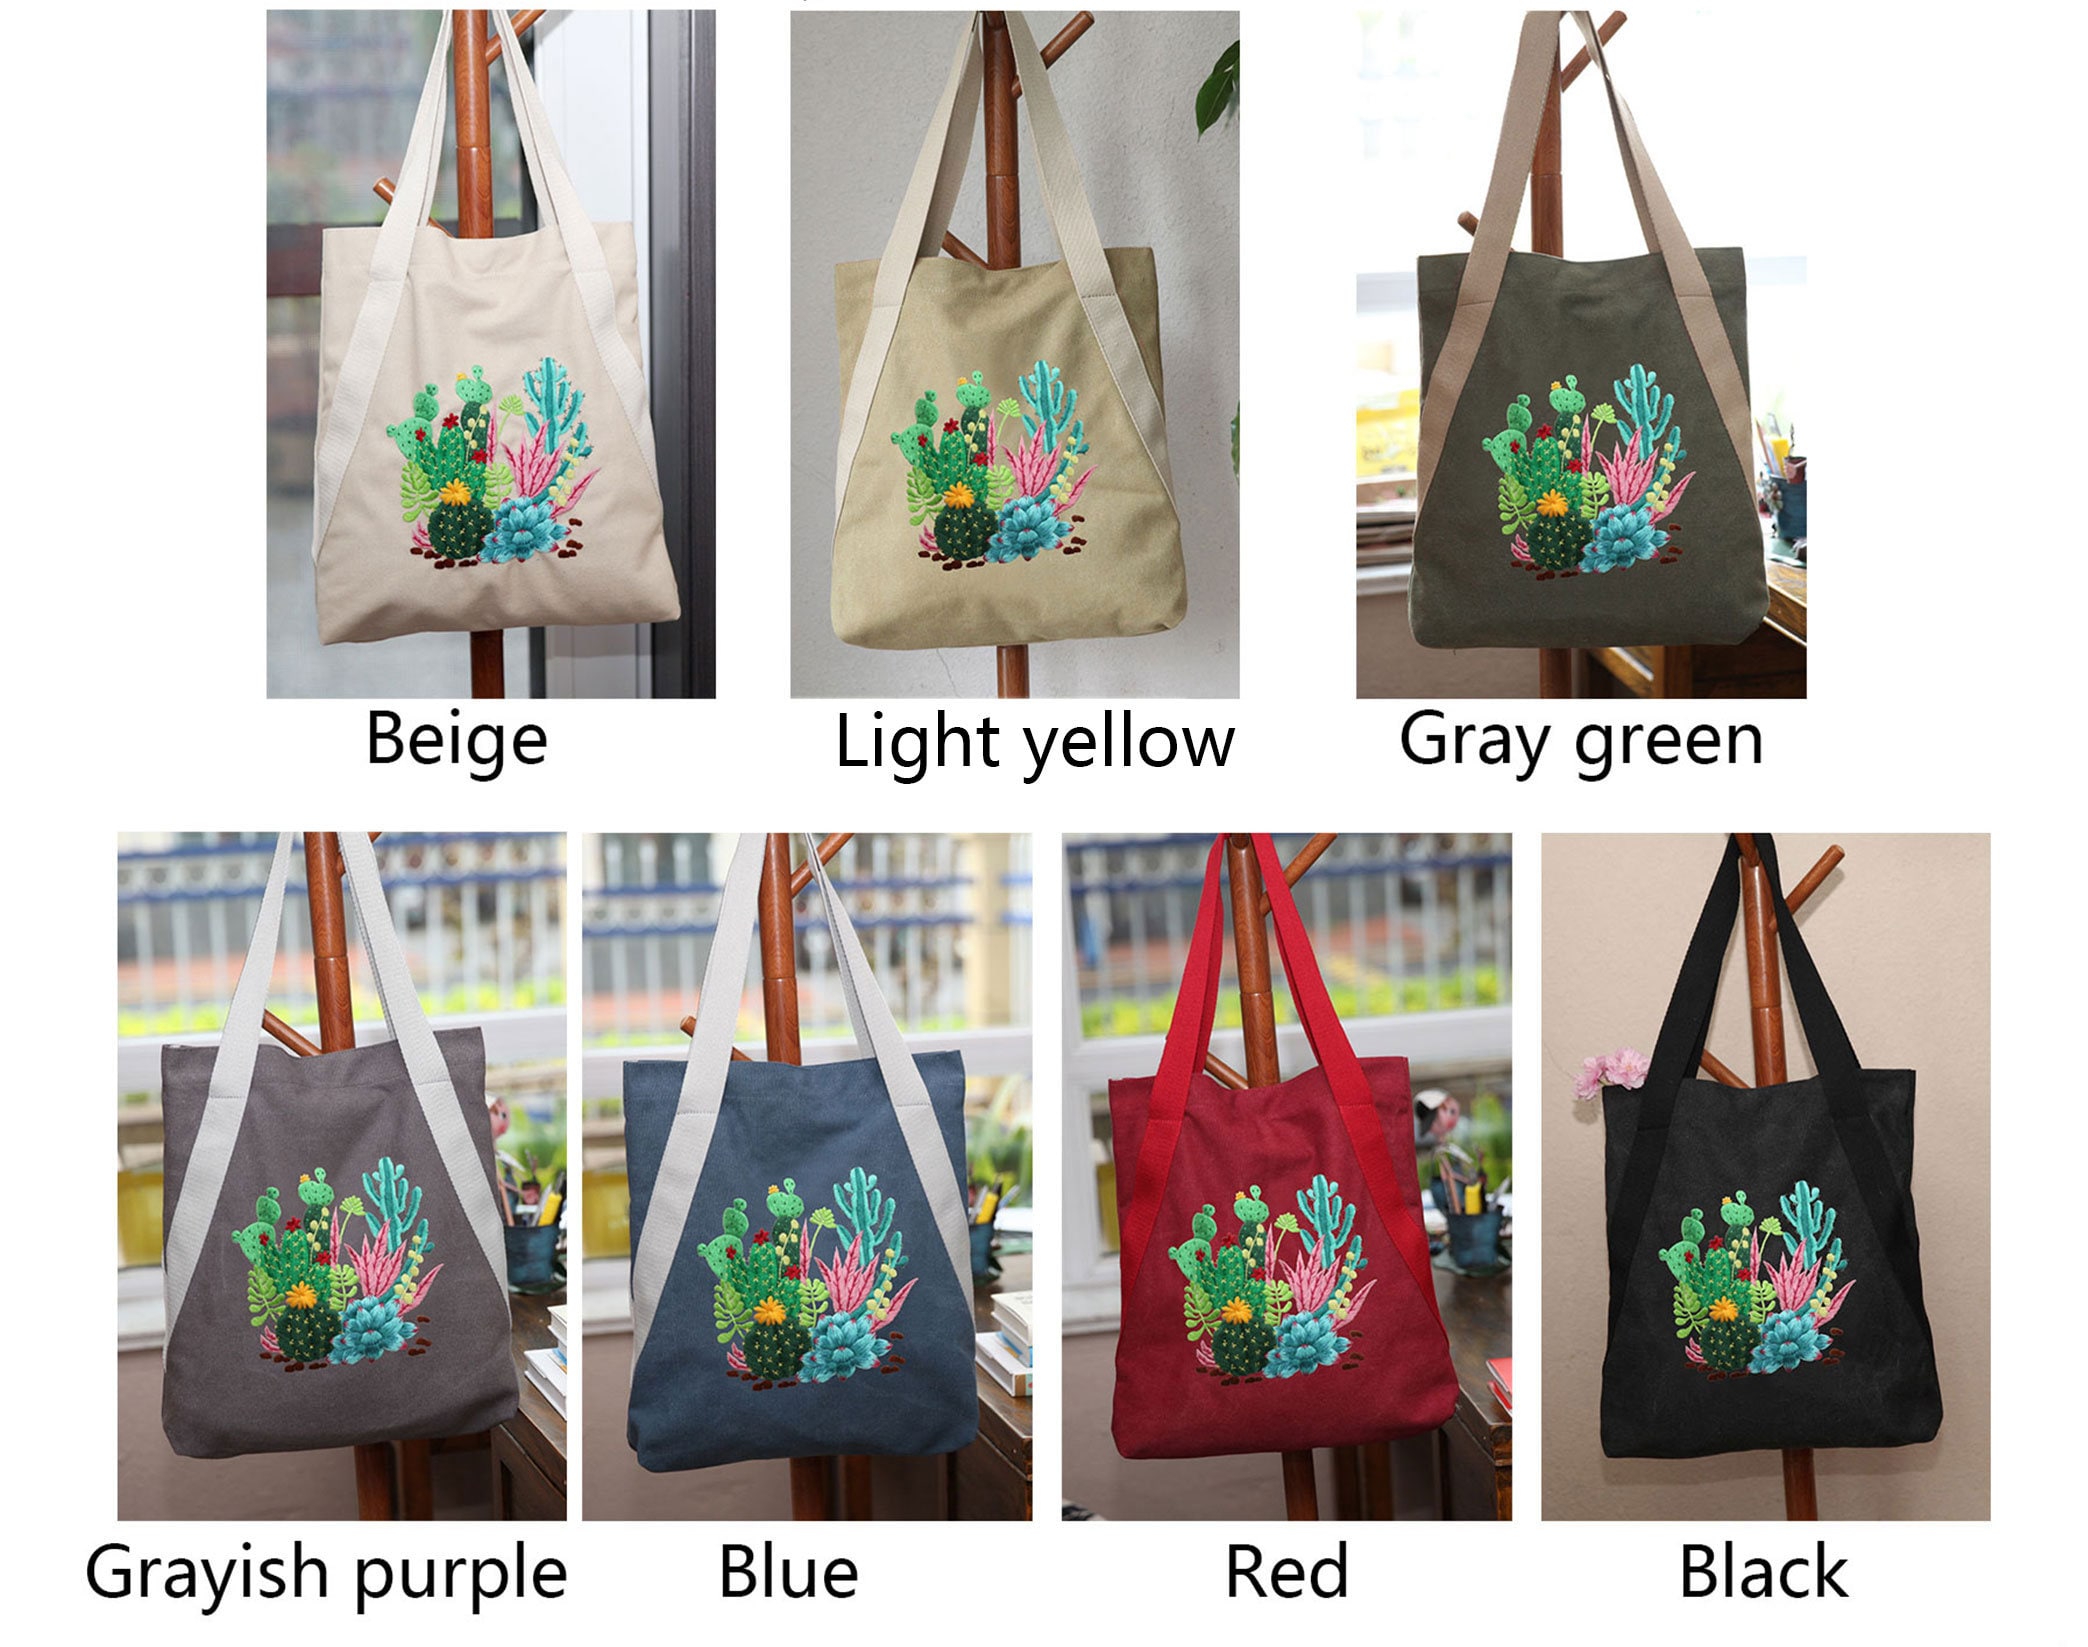 Embroidery Bag for Women Organizer Bag Embroidery Projects Sewing Cross  Girls Gift with Flower Pattern Tote Bag for Adults , Type B